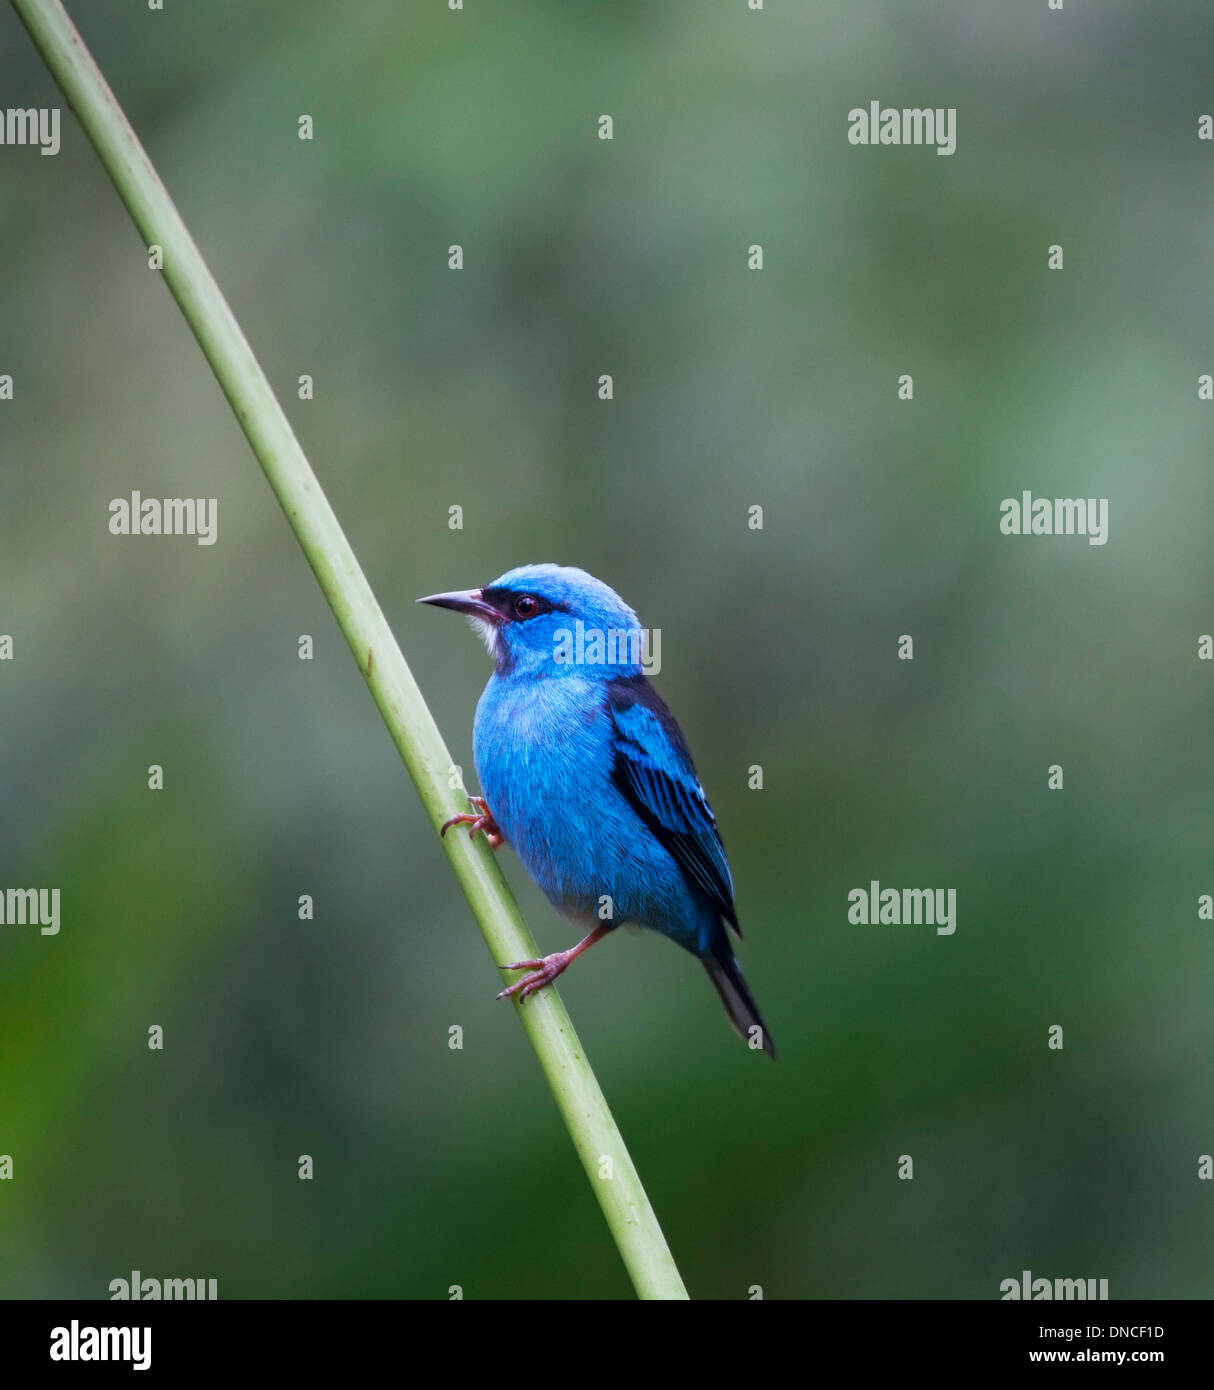 Blue Dacnis (Dacnis cayana) male bird perched on branch in Costa Rica. Also known as Turquoise Honeycreeper. Stock Photo